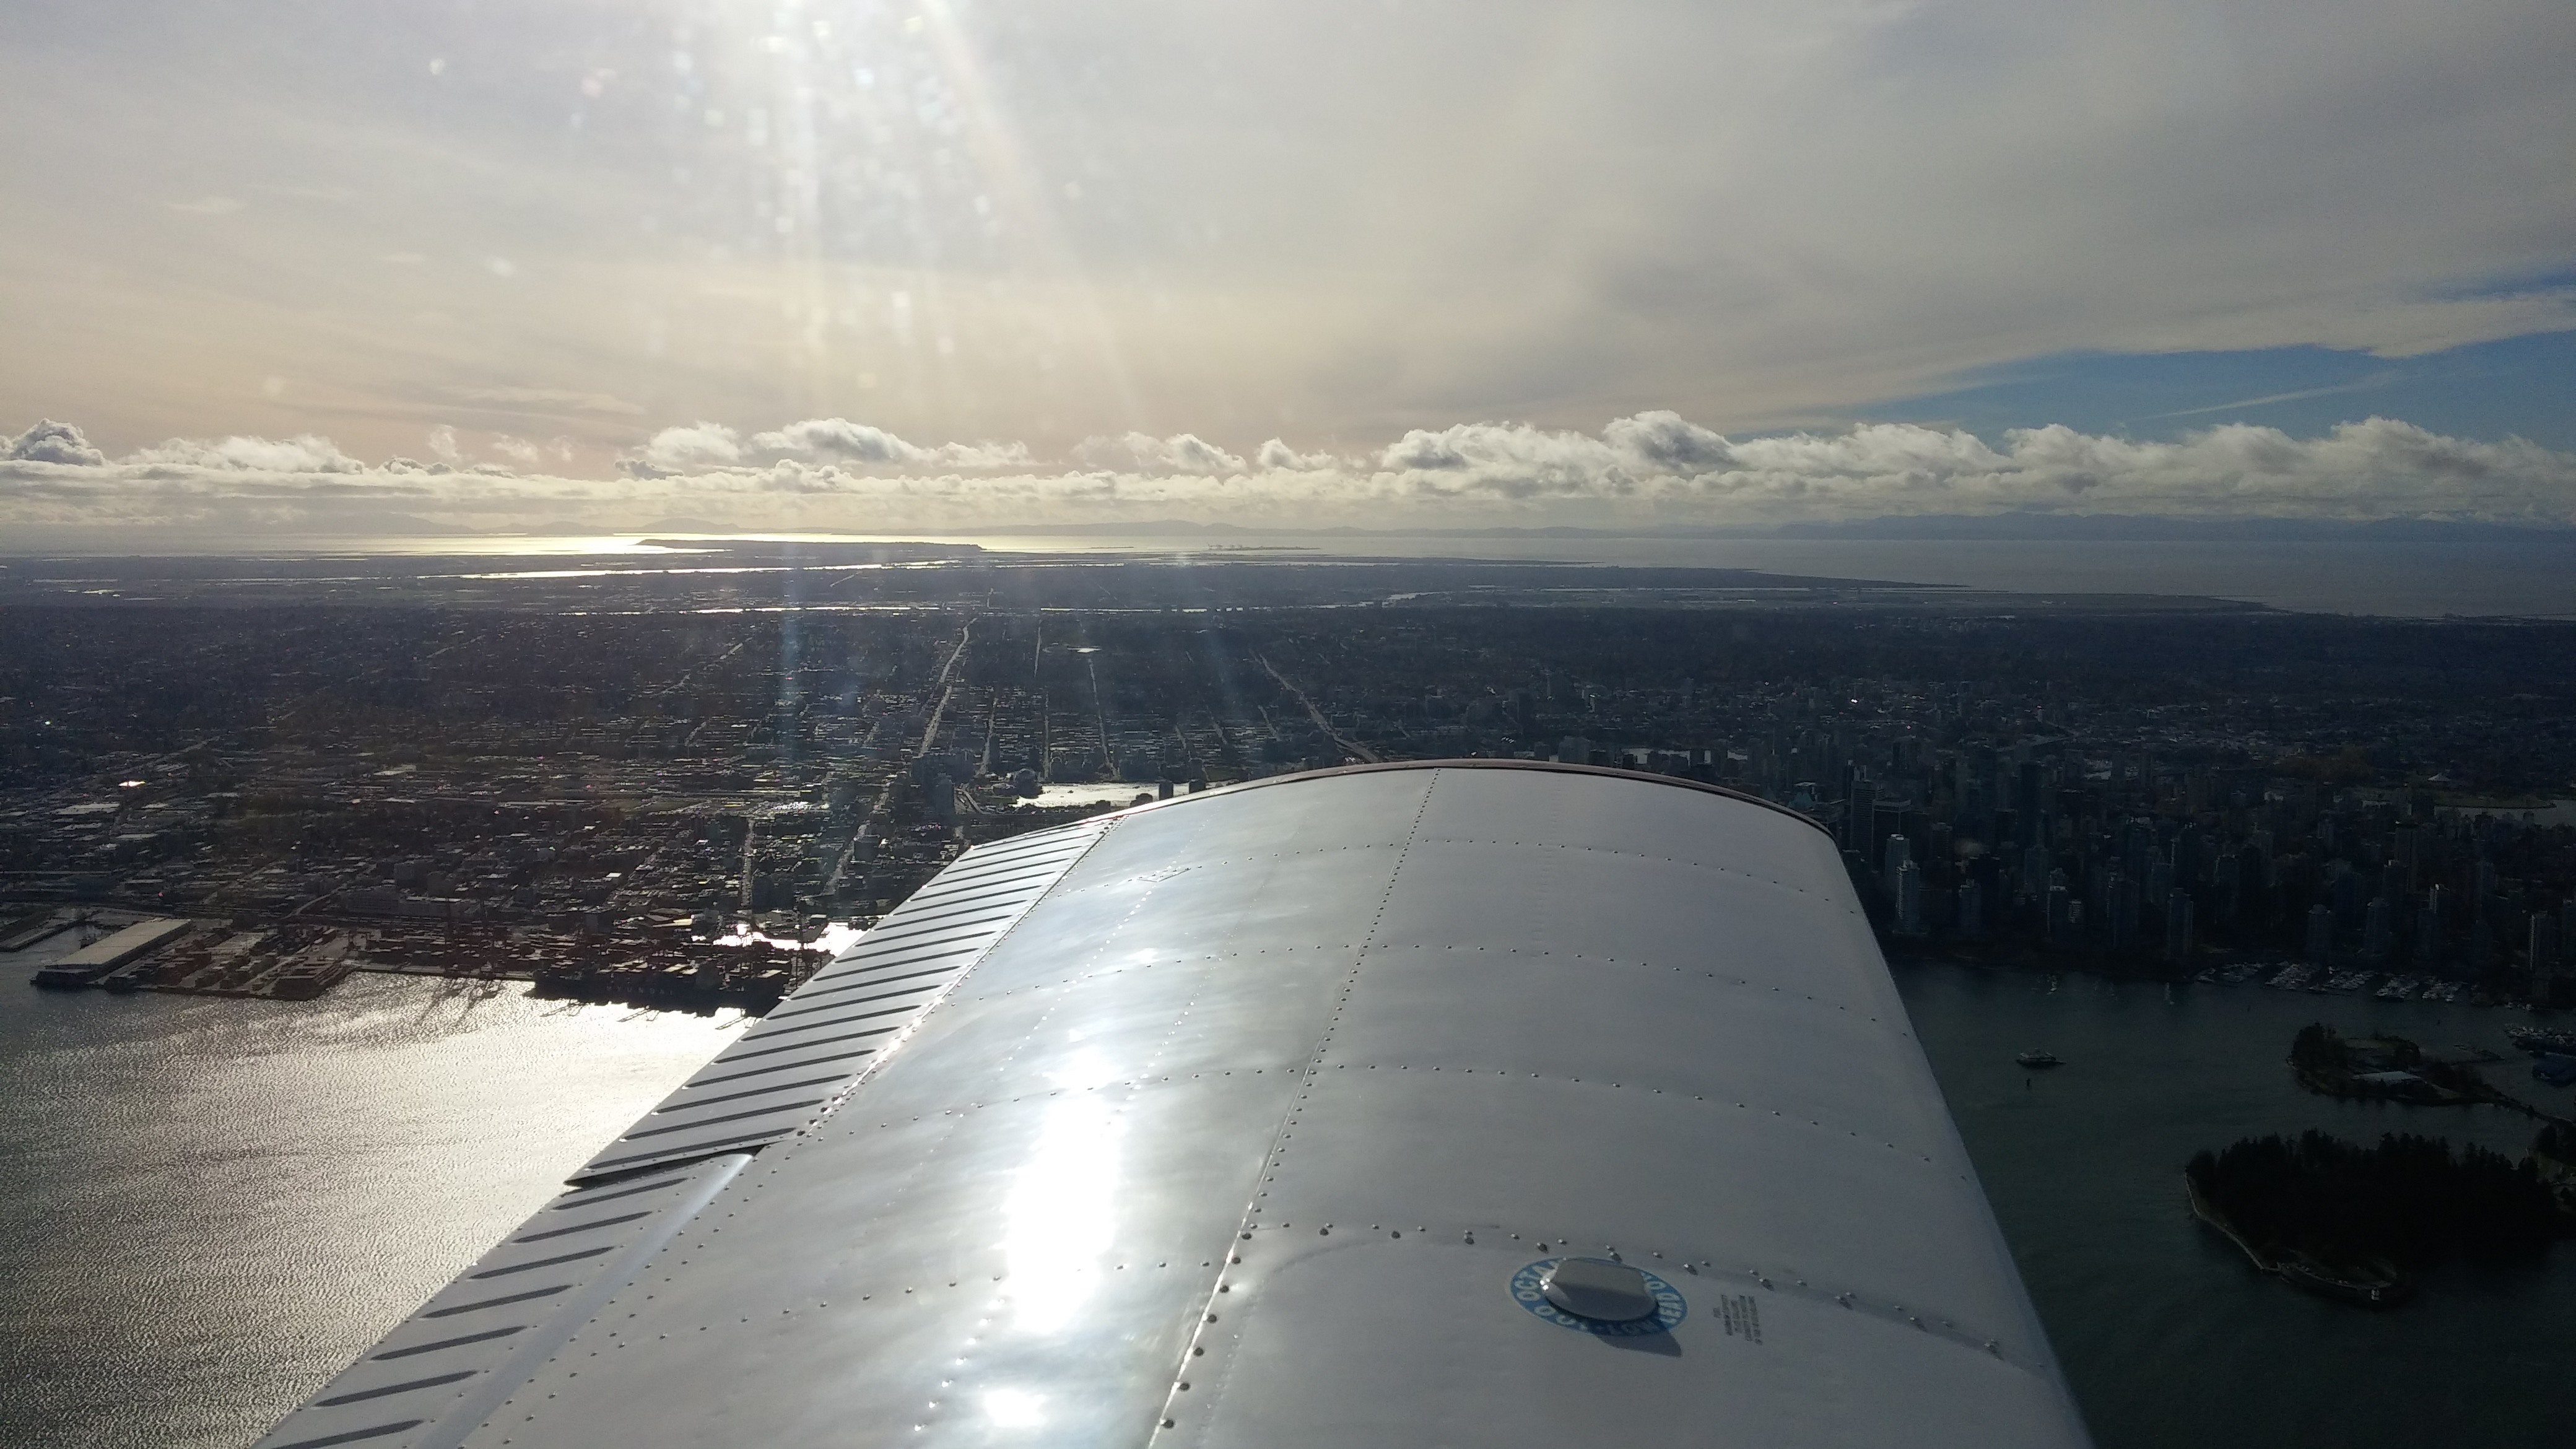 Over Vancouver Harbour, facing south